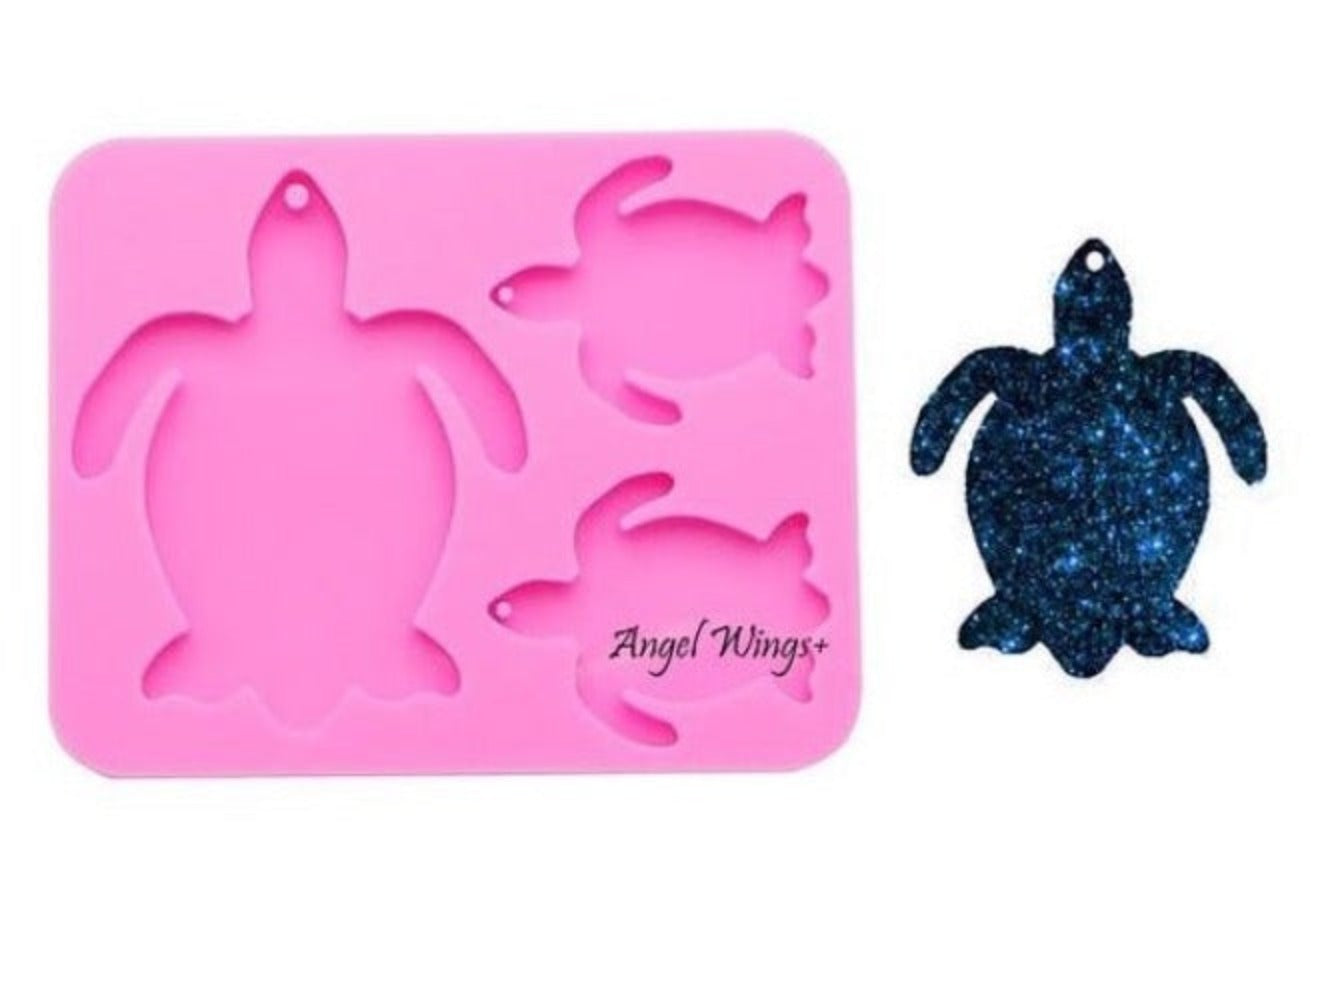 resin keychain silicone sea turtle family mold